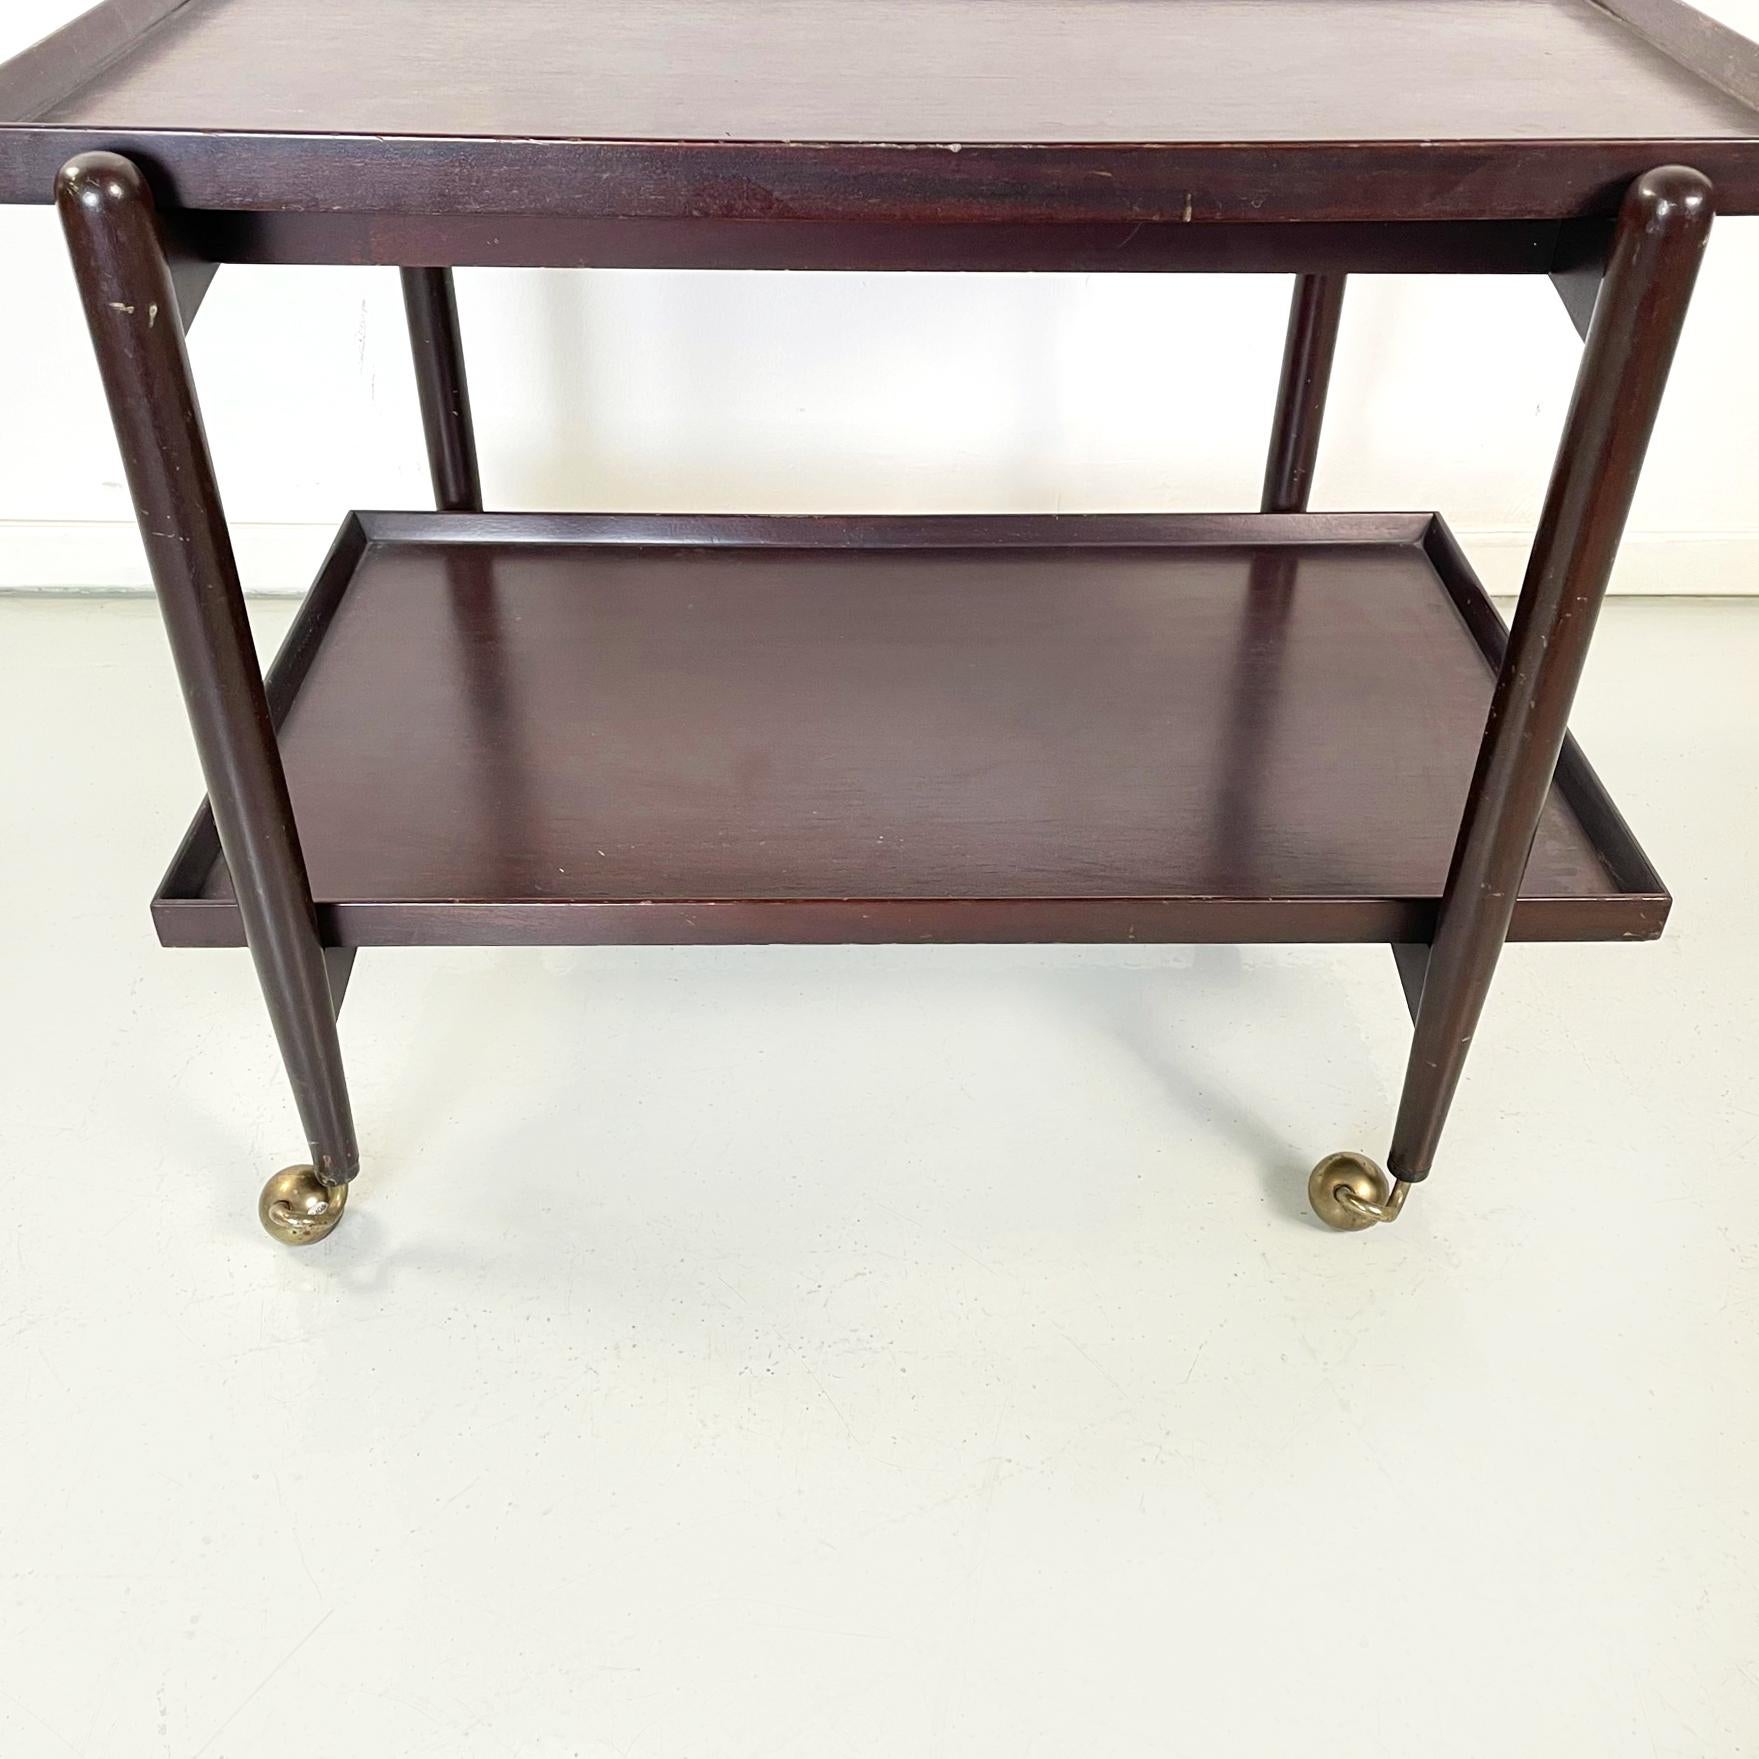 Italian Midcentury Dark Wooden Cart with Sliding Shelves and Brass Wheels 1960s For Sale 1